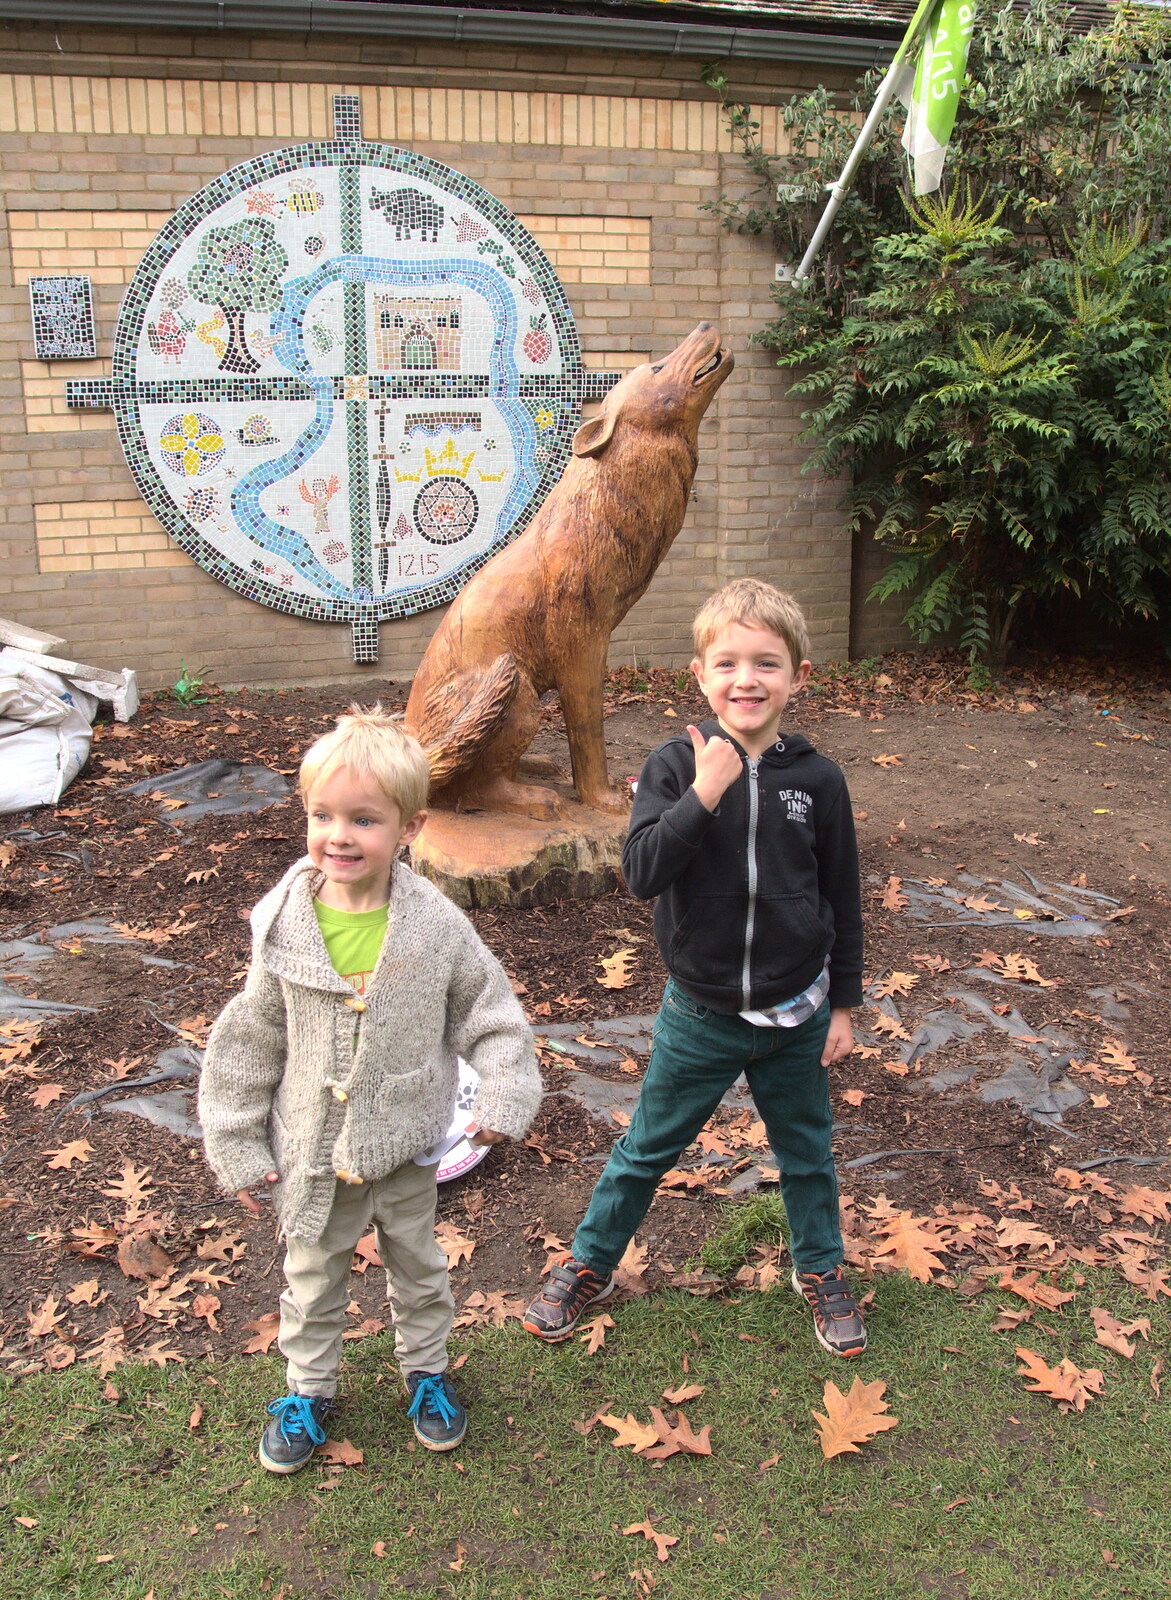 The boys stand in front of a carved wooden wolf from Abbey Gardens in Autumn, Bury St. Edmunds, Suffolk - 27th October 2015